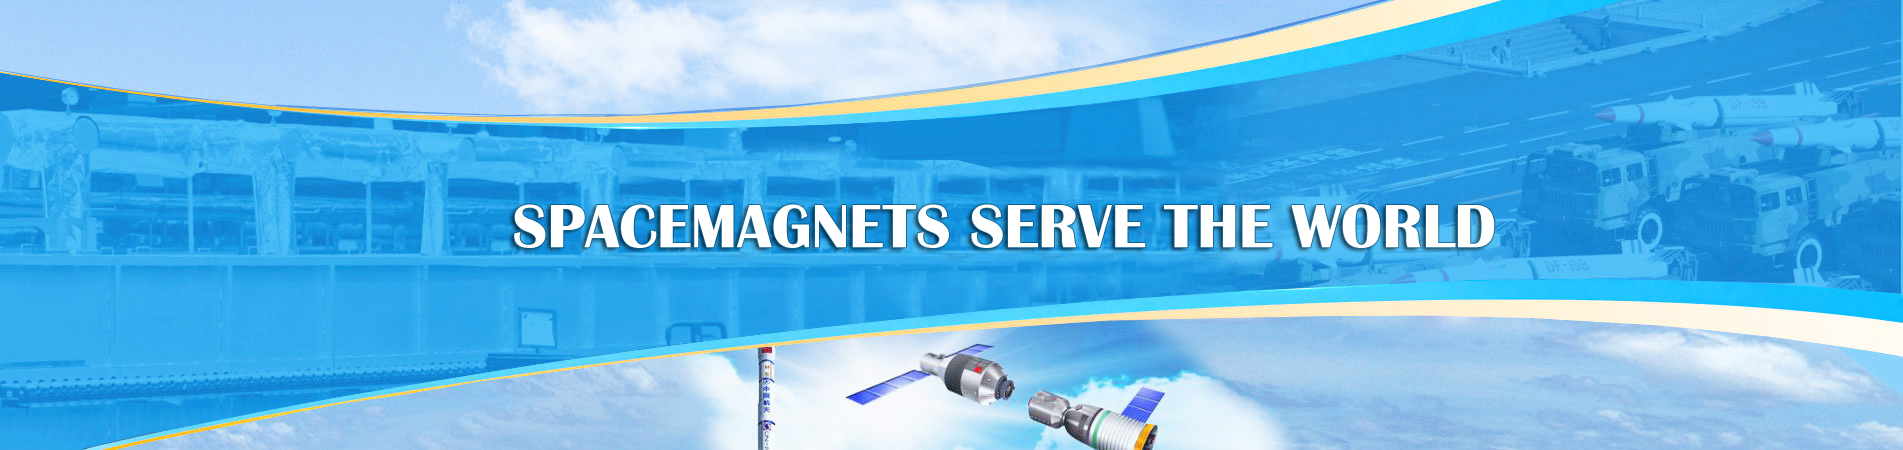 Spacemagnets-serve-the-world.jpg